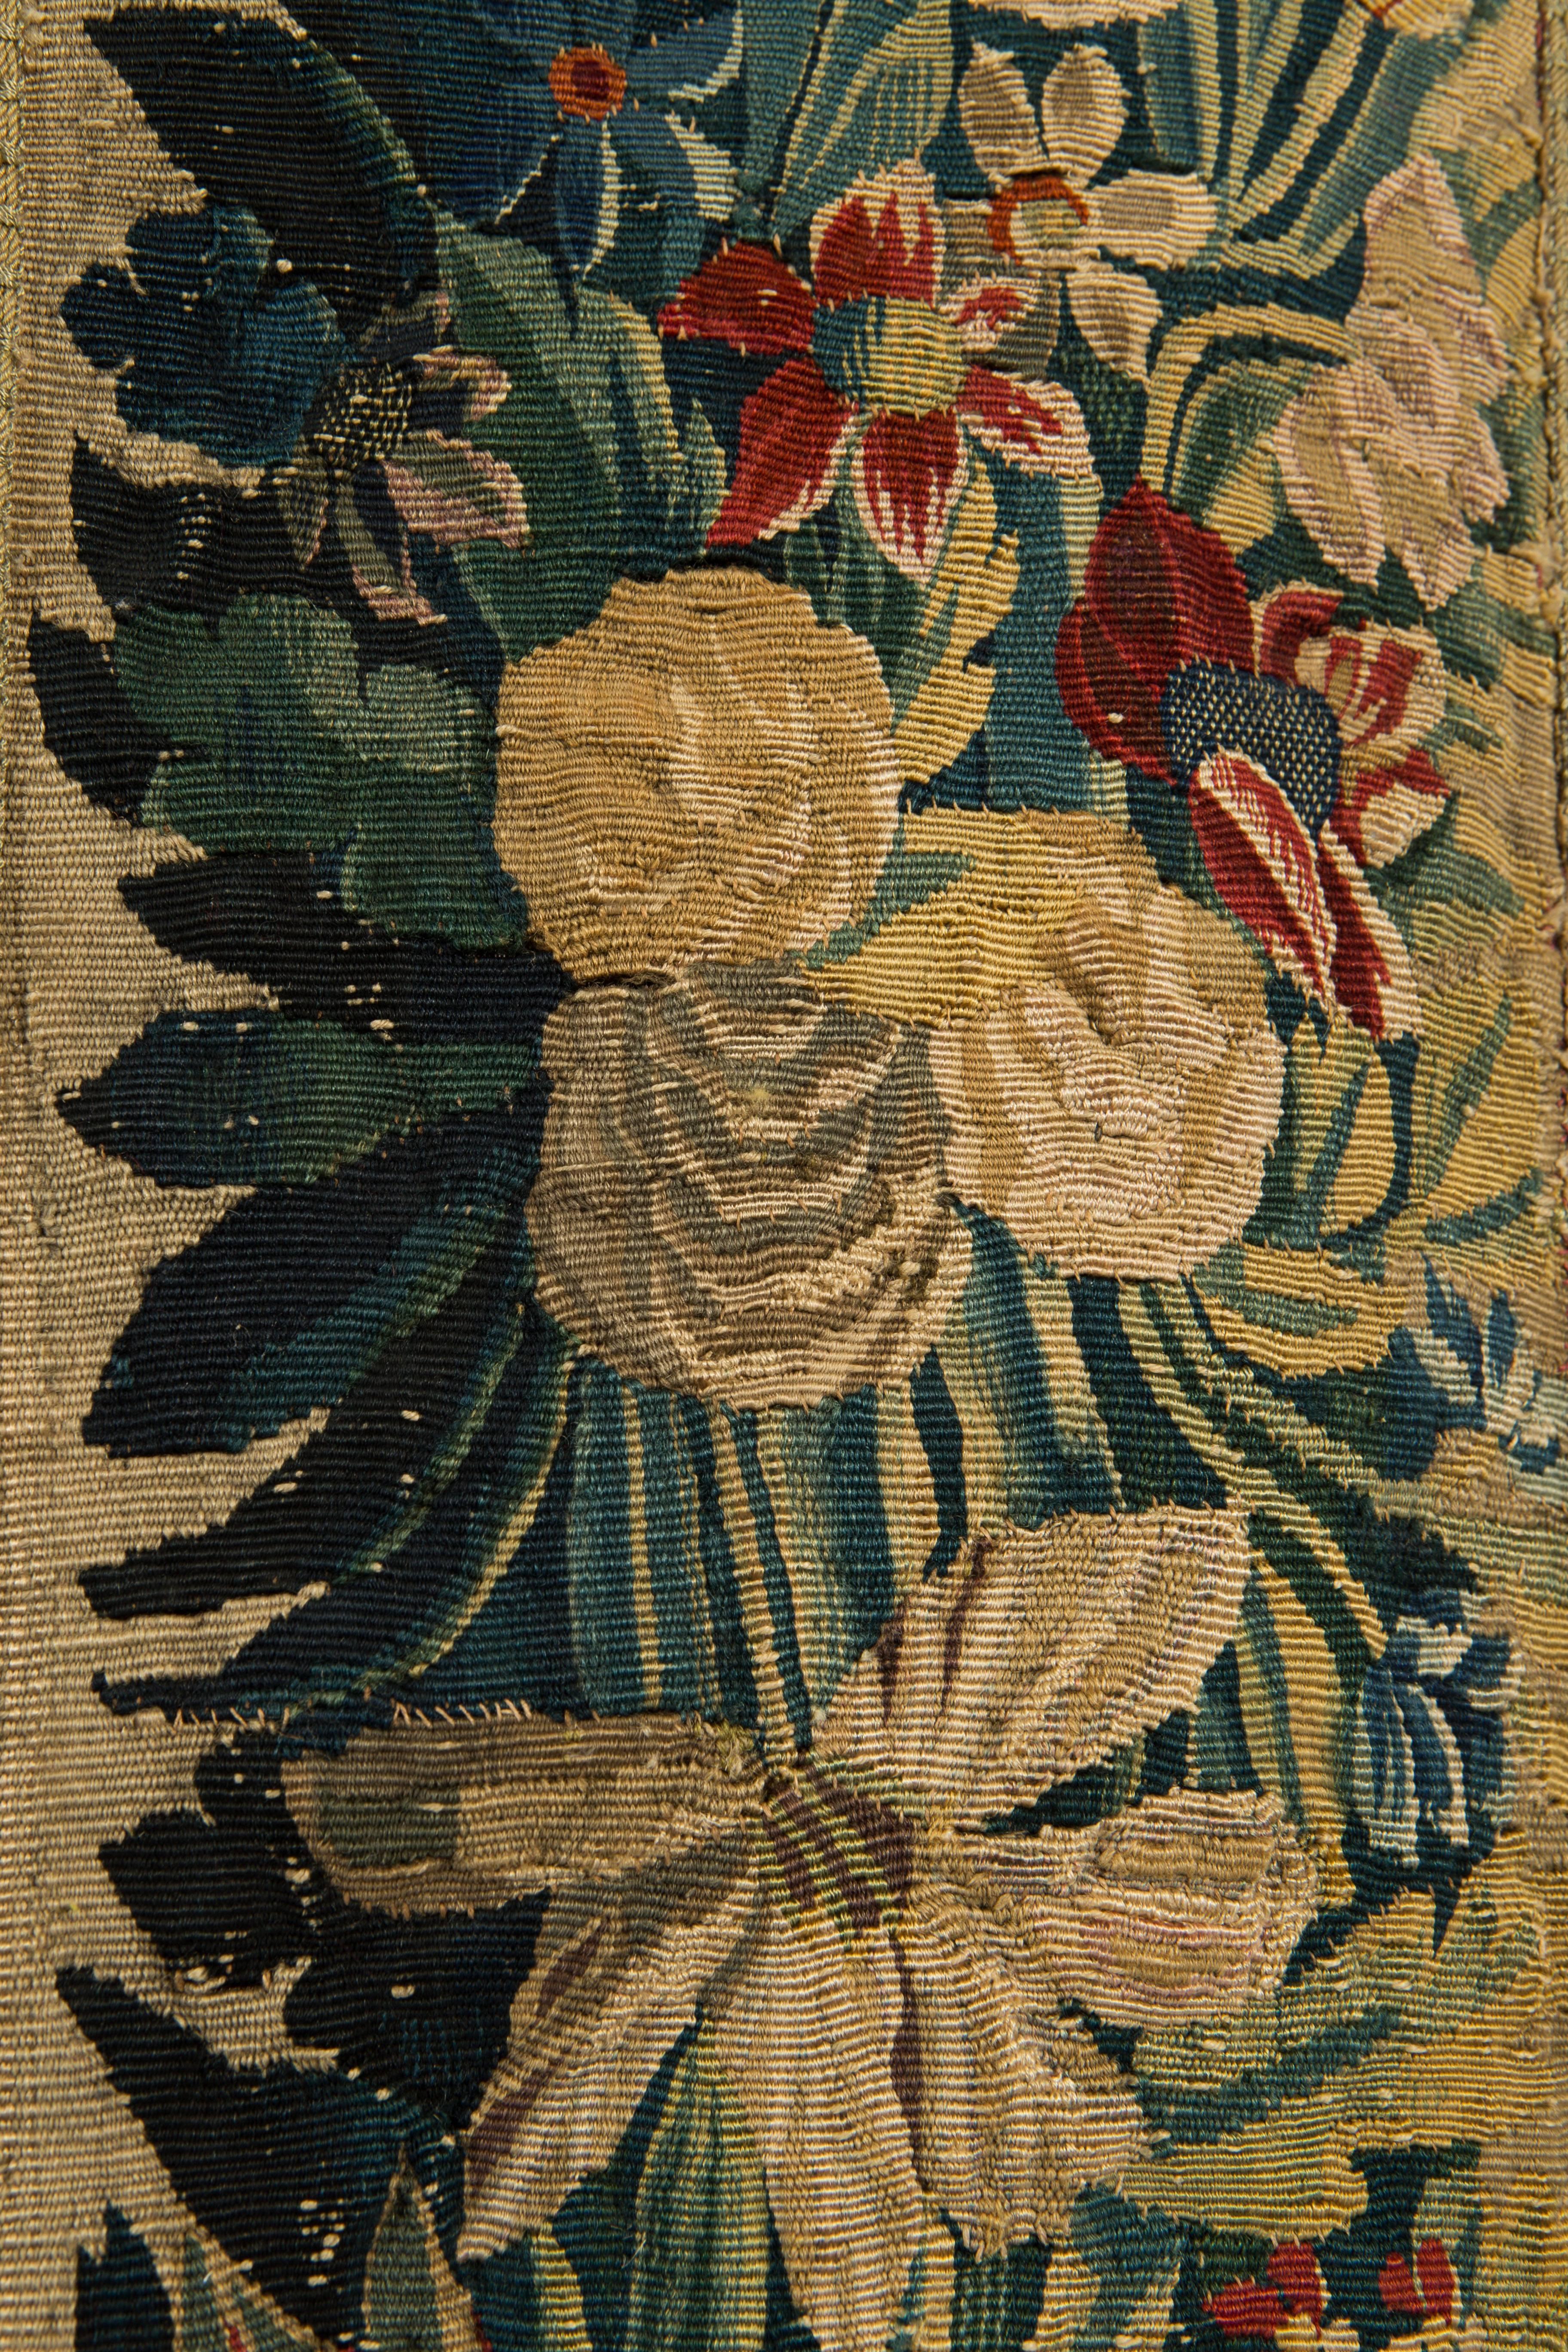 Belgian Late 17th Century Flemish Floral Tapestry in Blues and Red